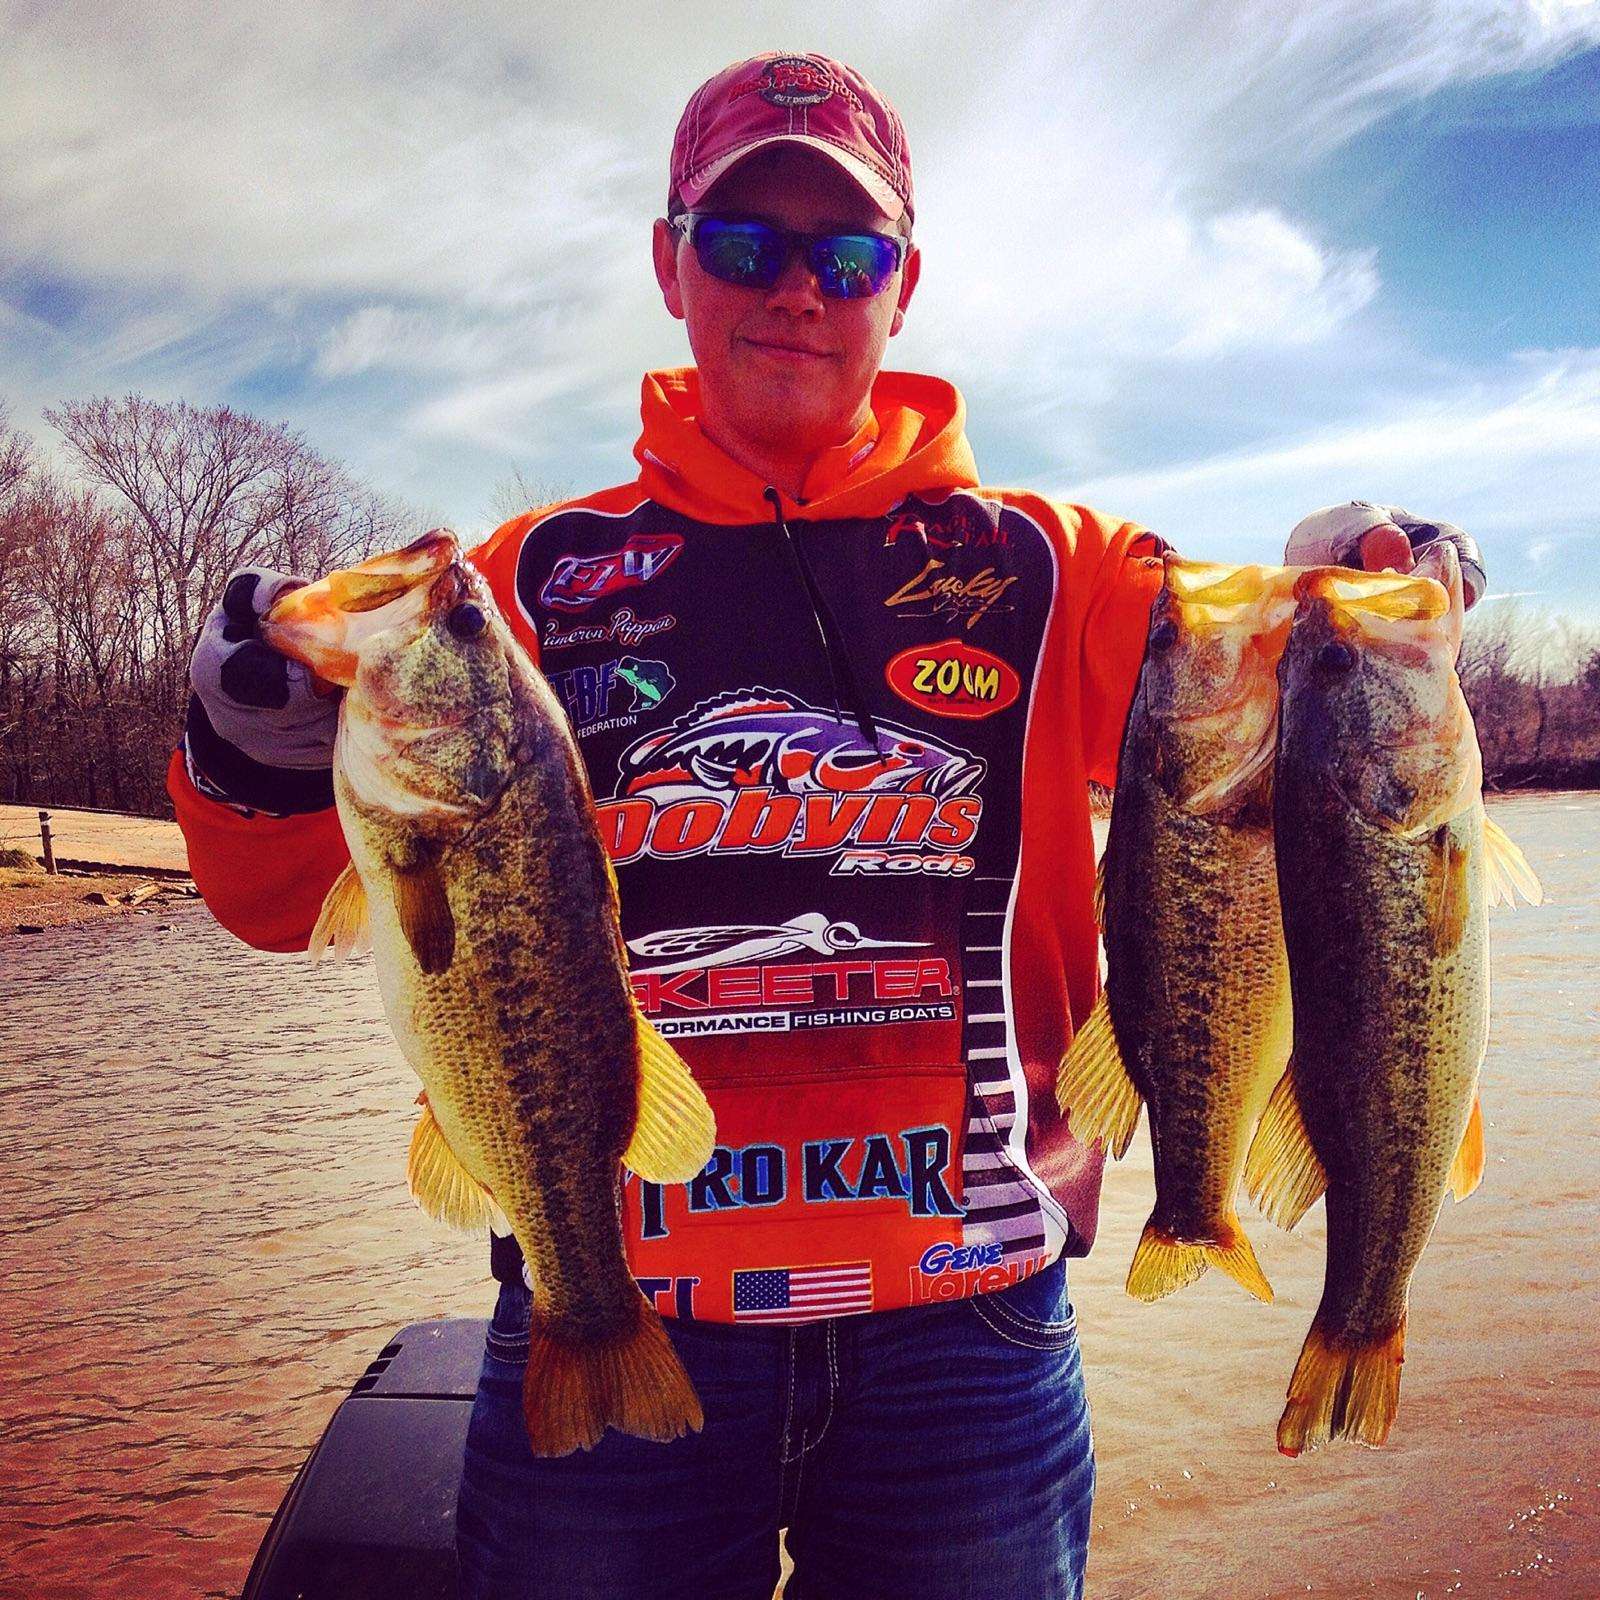 <p>Kansas: Cameron Pappan</p>
<p>
Pappan is a junior at Winfield High School. Pappan won the Kansas TBF Junior State Championship in 2014. He won Rookie of the Year in his club in 2012 and followed it up the next year with an Angler of the Year win. He plans to work on cleaning up a local fishing park this summer.